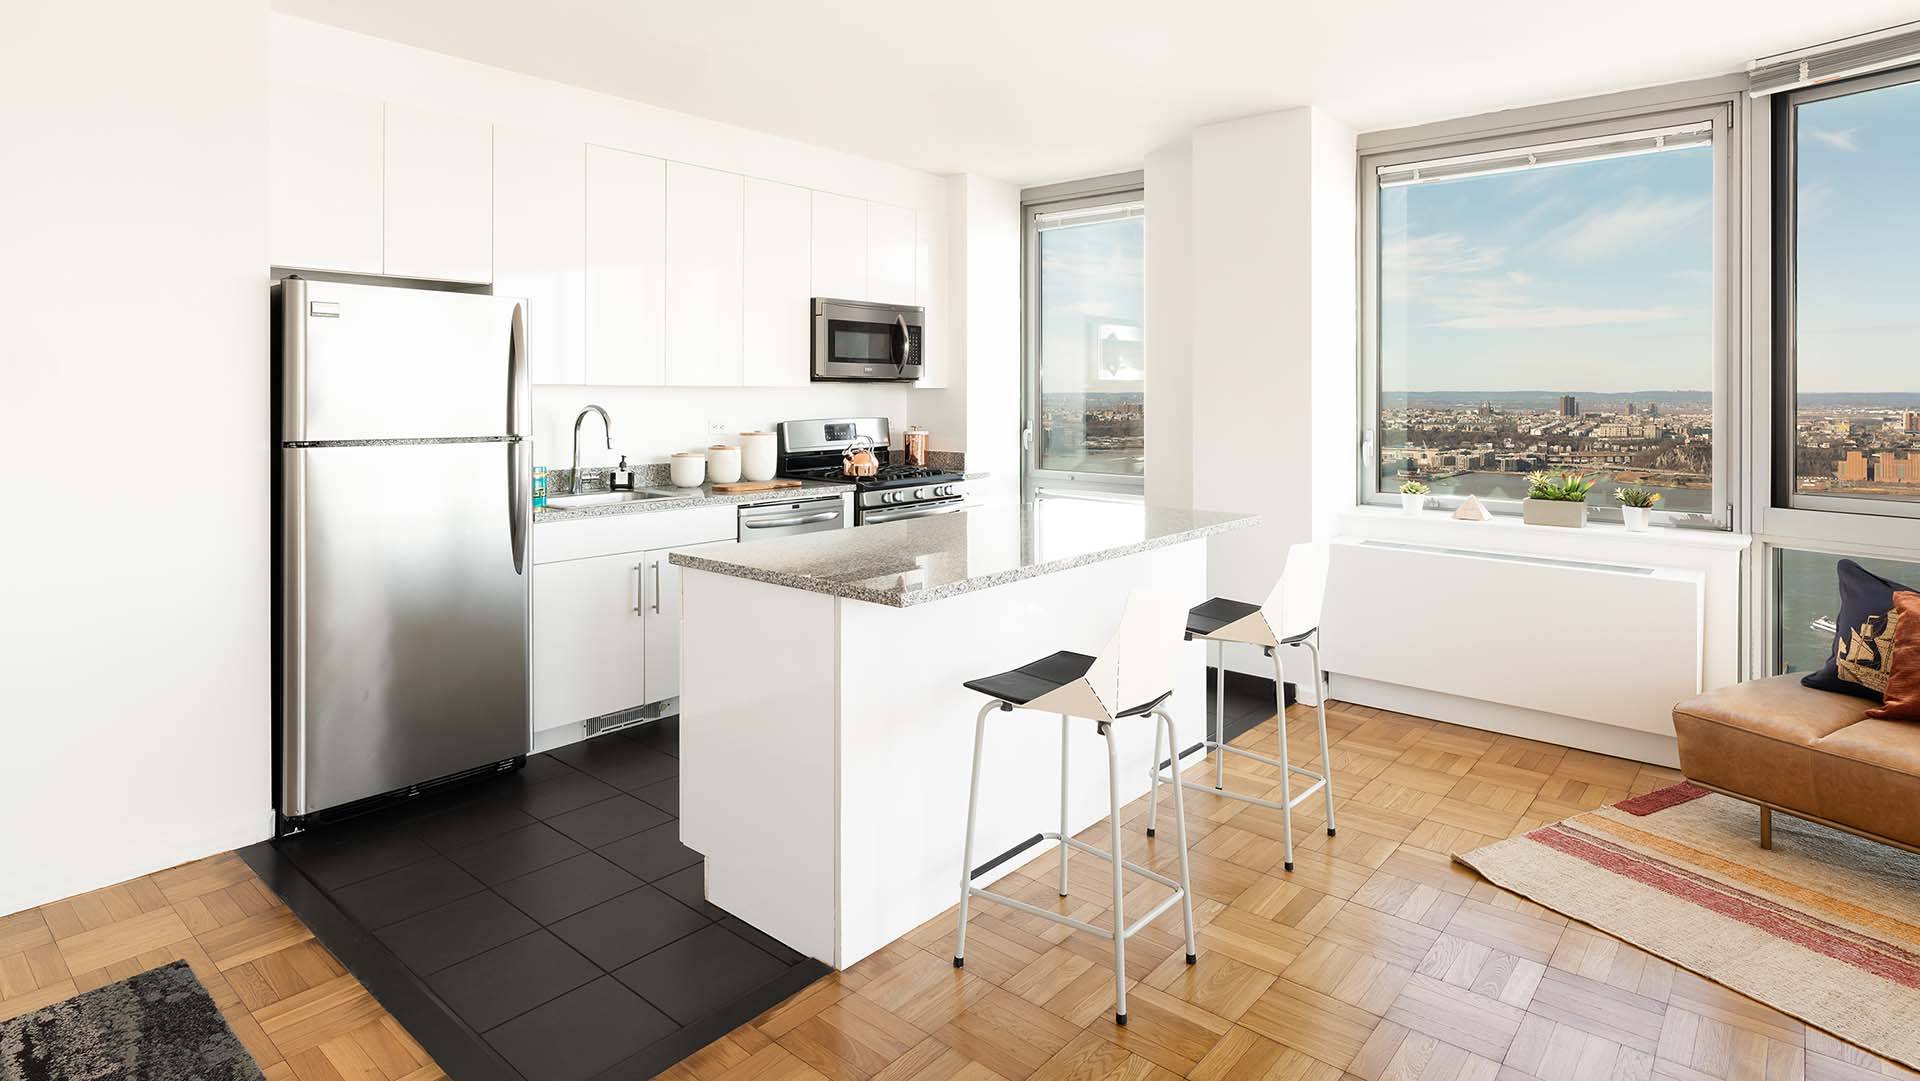 Studio with a Spacious Living Area, Great Closet Space, a Separate Kitchen, Floor-to-Ceiling Windows and a Western Exposure Providing a Views of the Hudson River by Hudson Yards